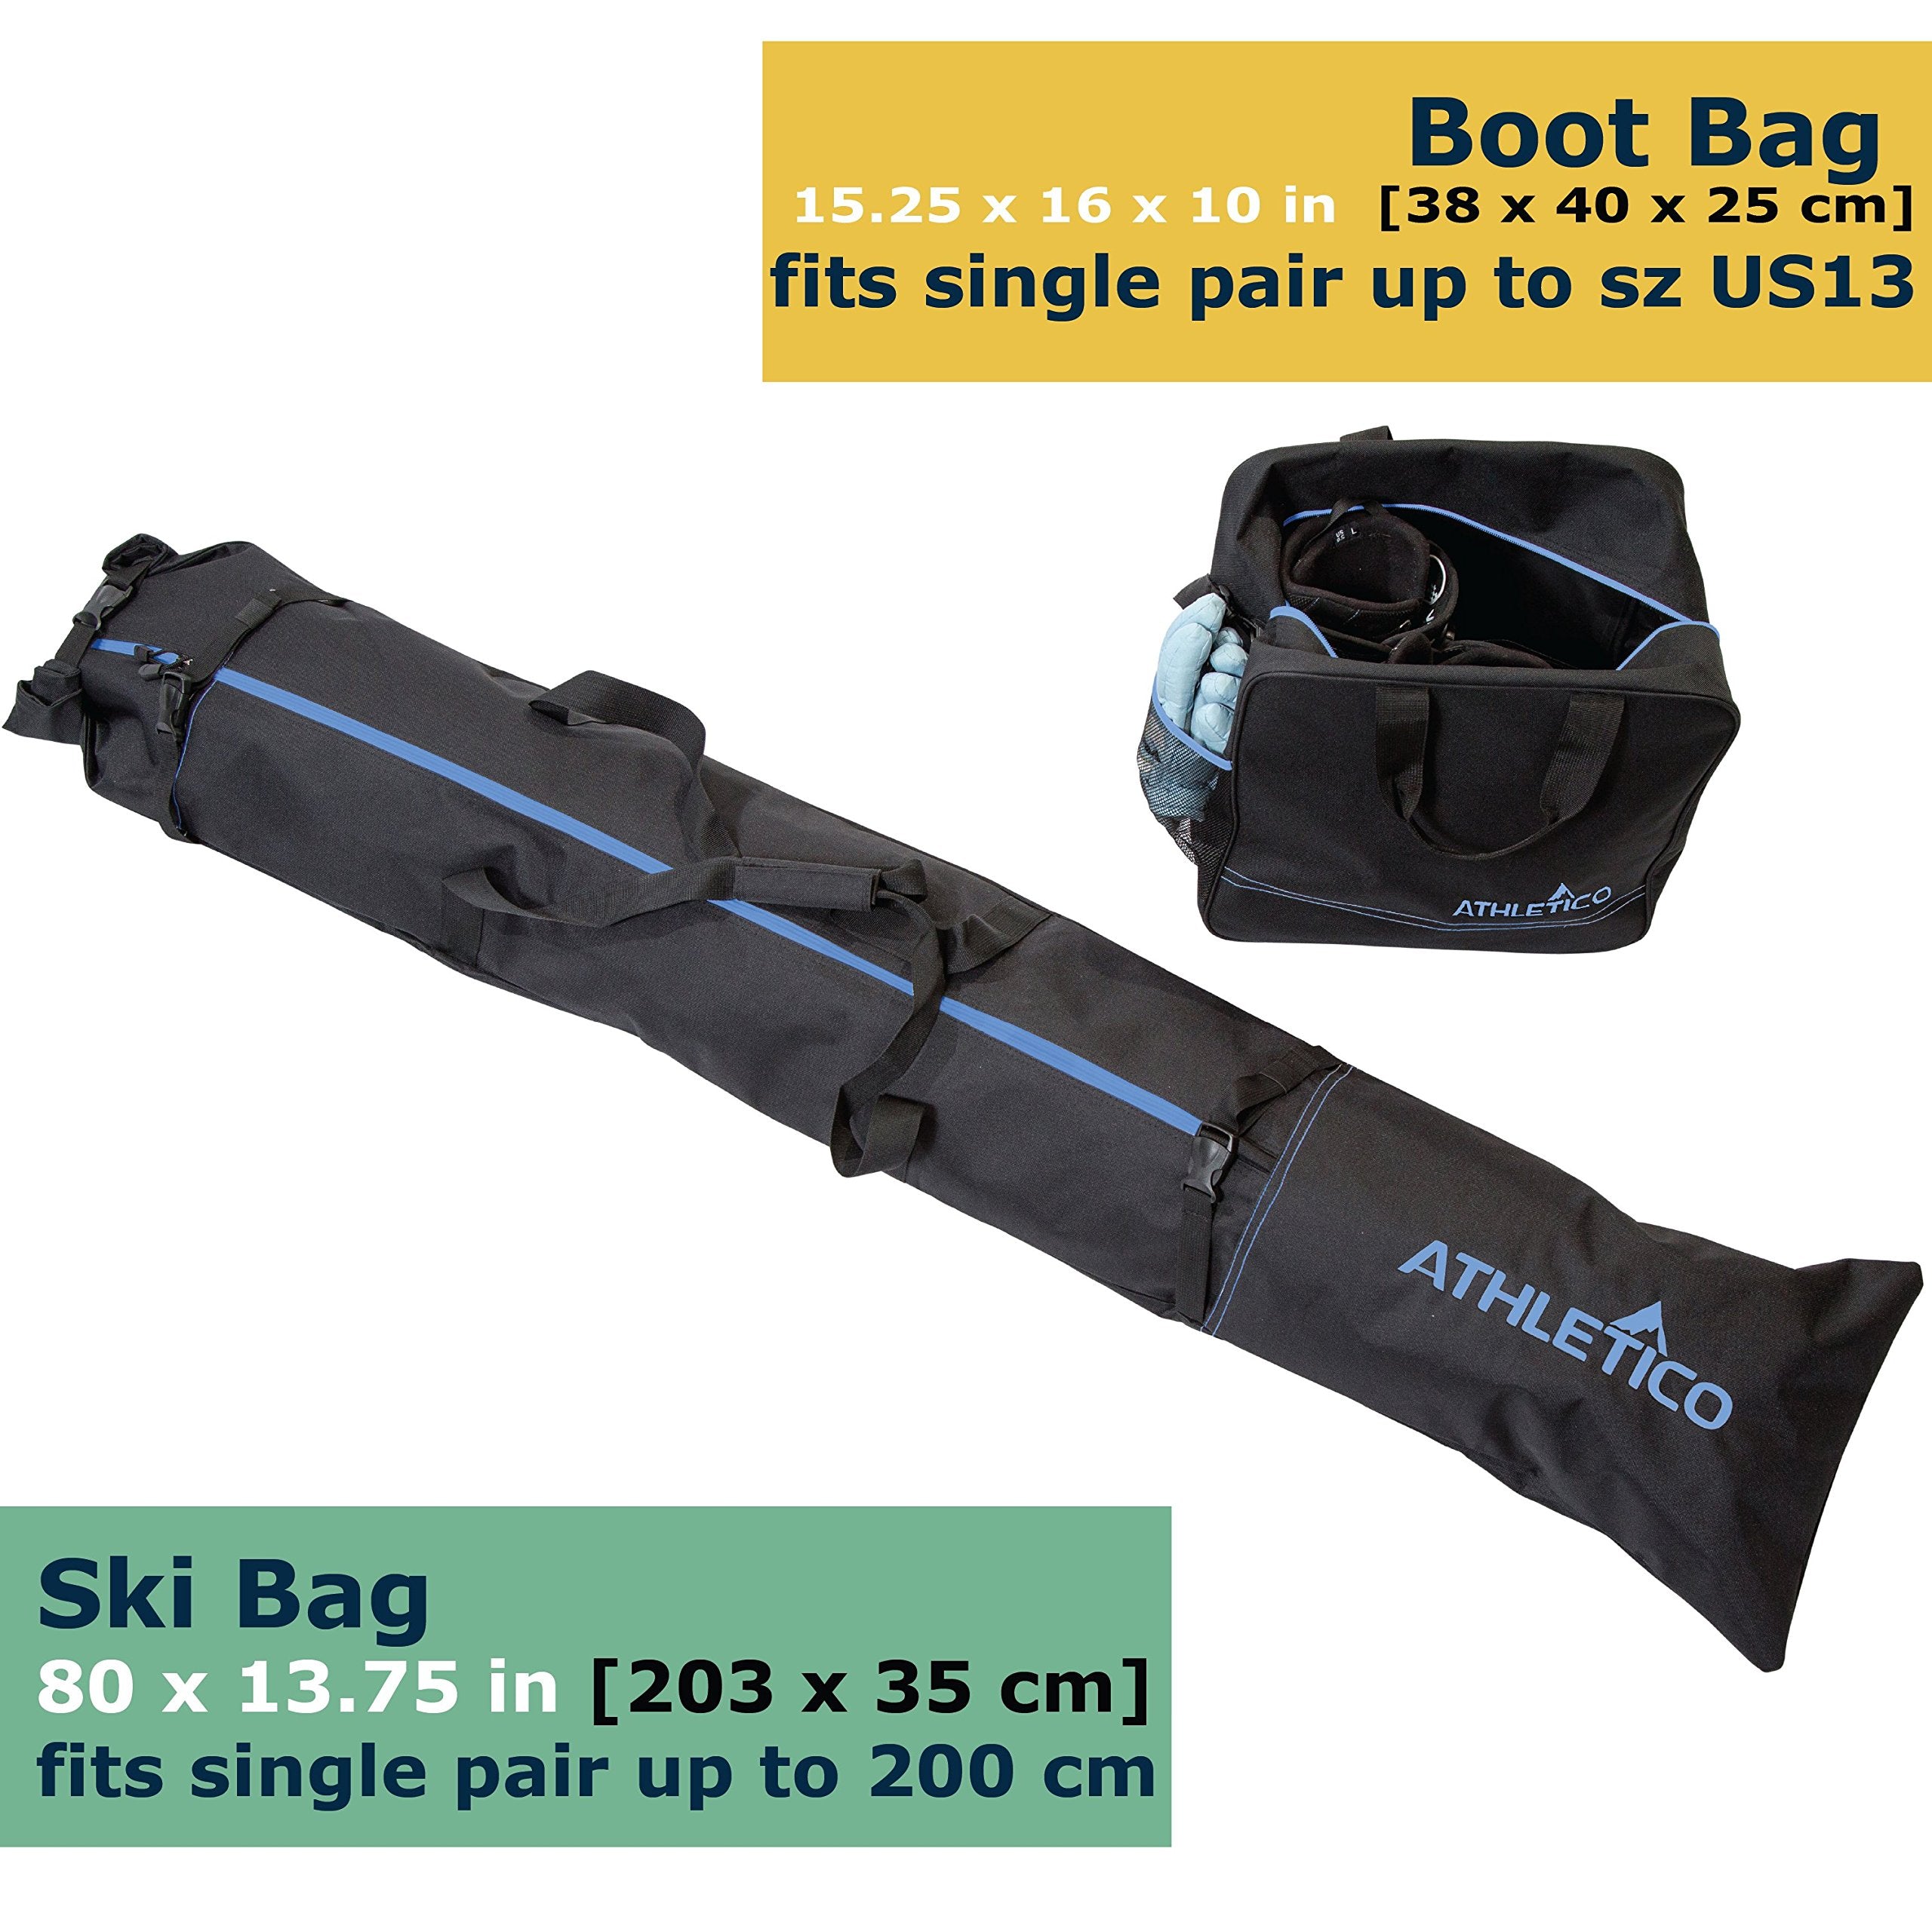 Athletico Ski Bag and Ski Boot Bag Combo - Ski Bags for Air Travel - Unpadded Snow Ski Bags Fit Skis Up to 200cm - For Men, Women, Adults, and Children  - Good